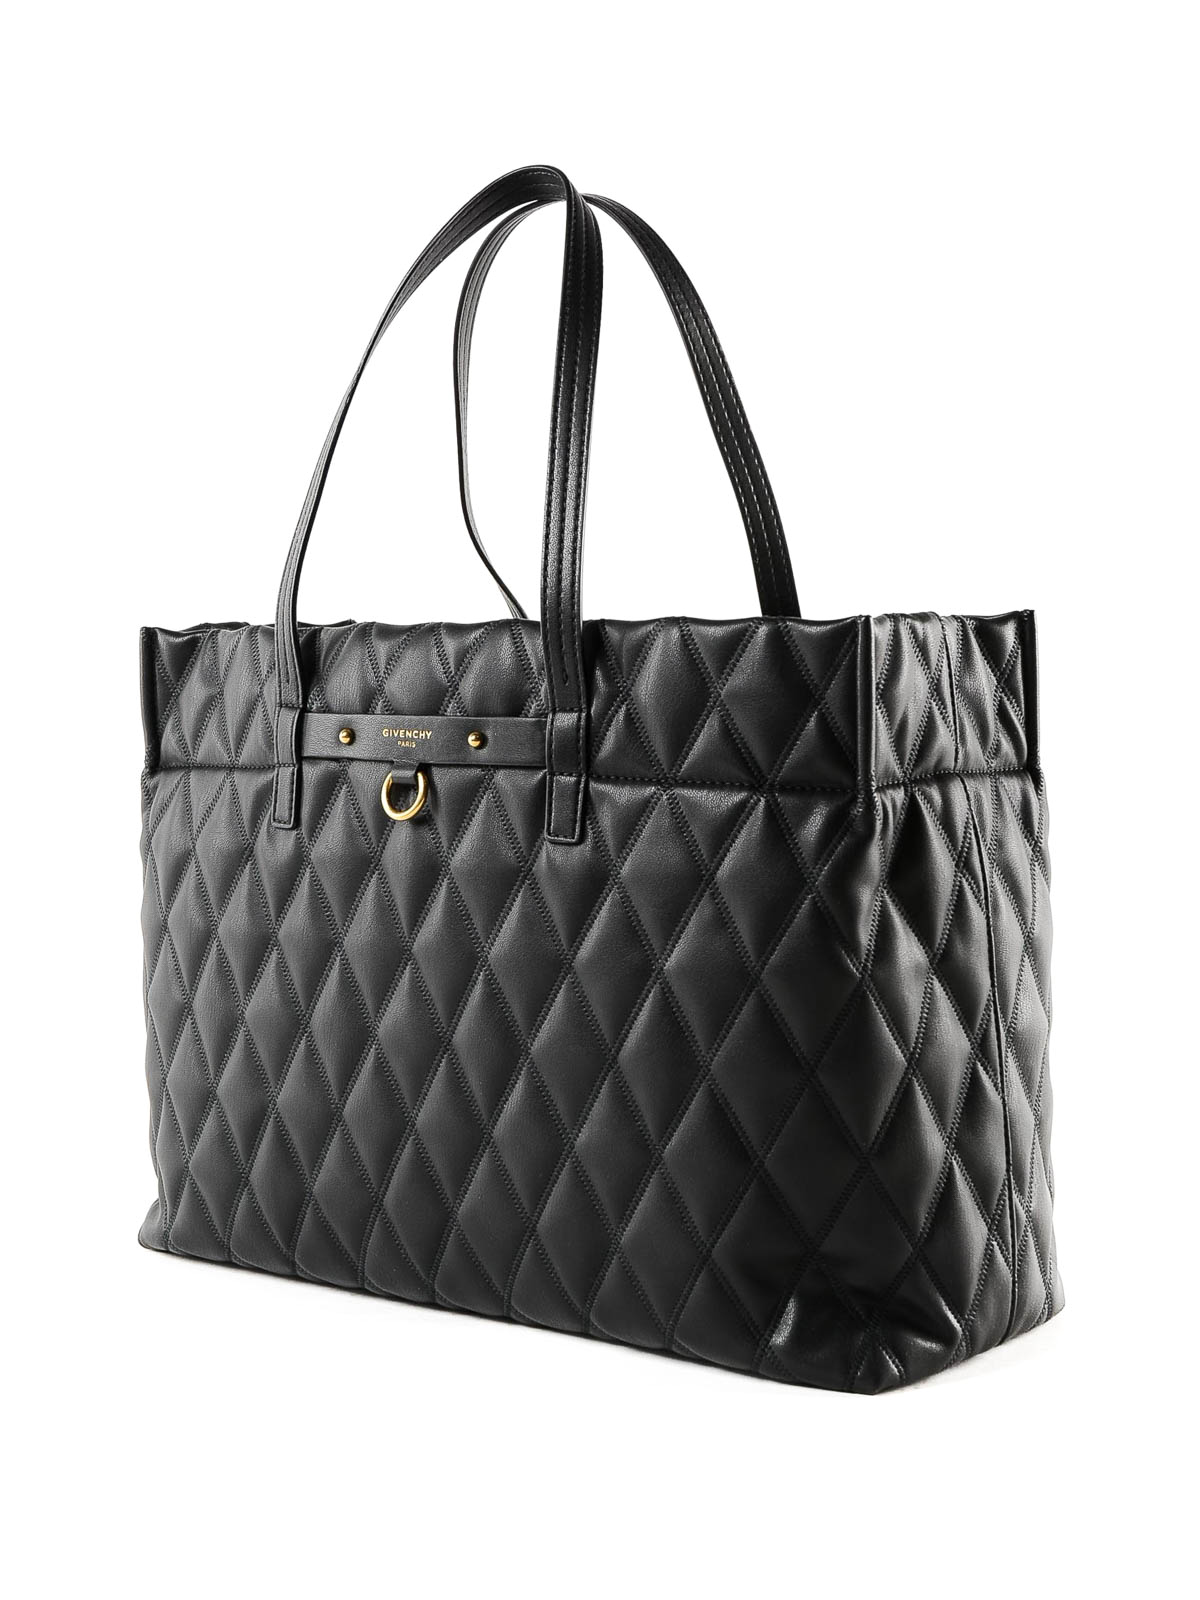 Givenchy - Duo quilted black tote bag - totes bags - BB506RB0CK001